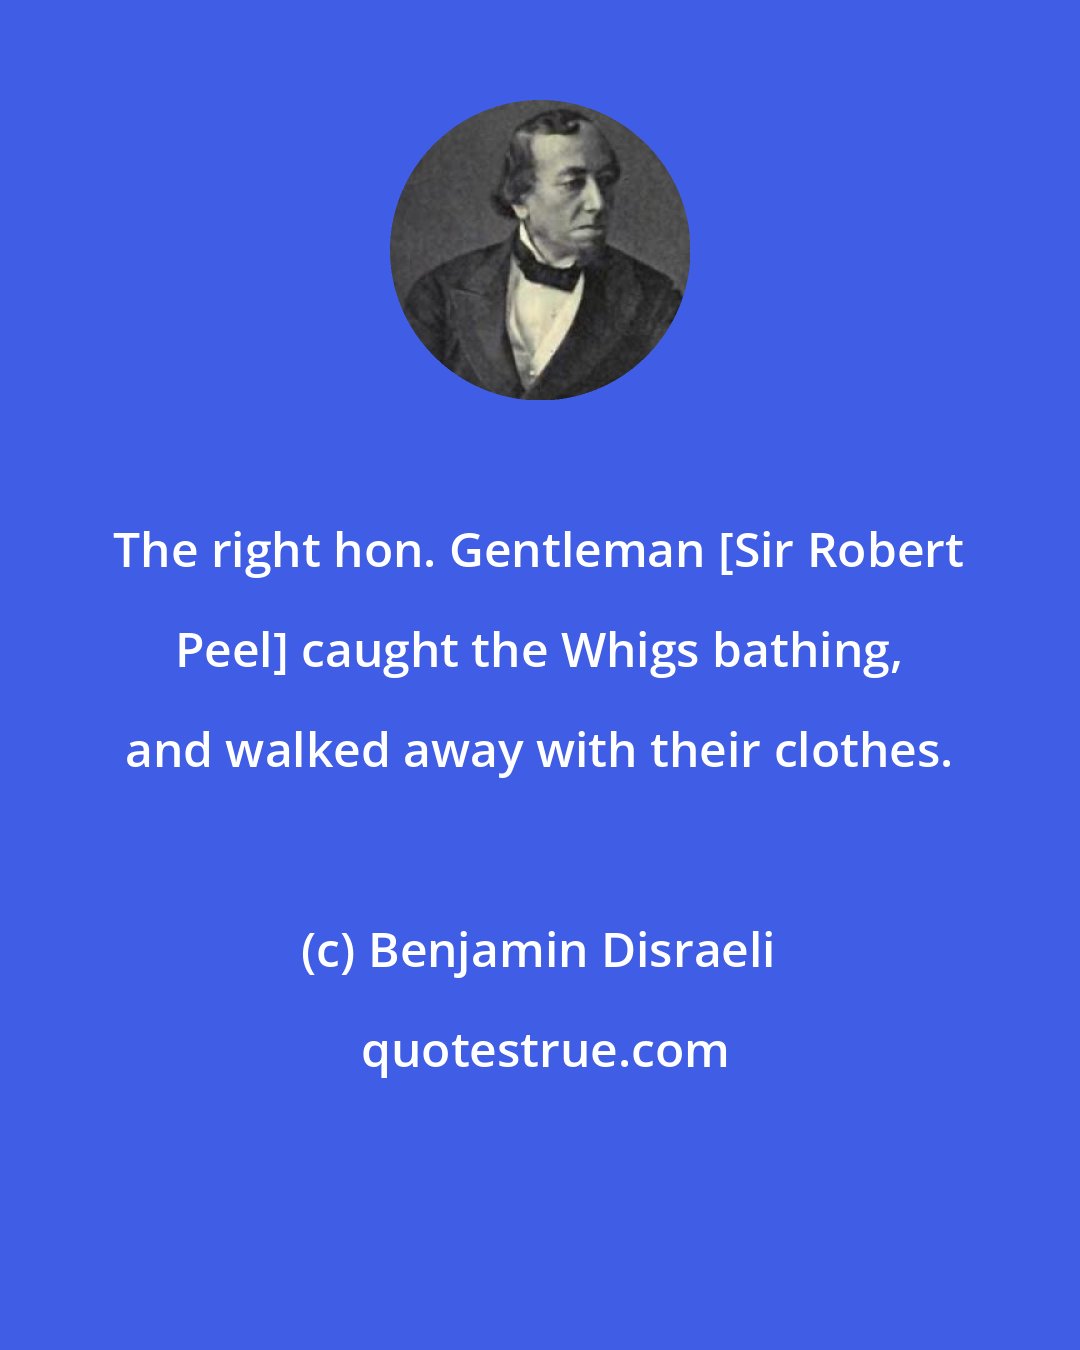 Benjamin Disraeli: The right hon. Gentleman [Sir Robert Peel] caught the Whigs bathing, and walked away with their clothes.